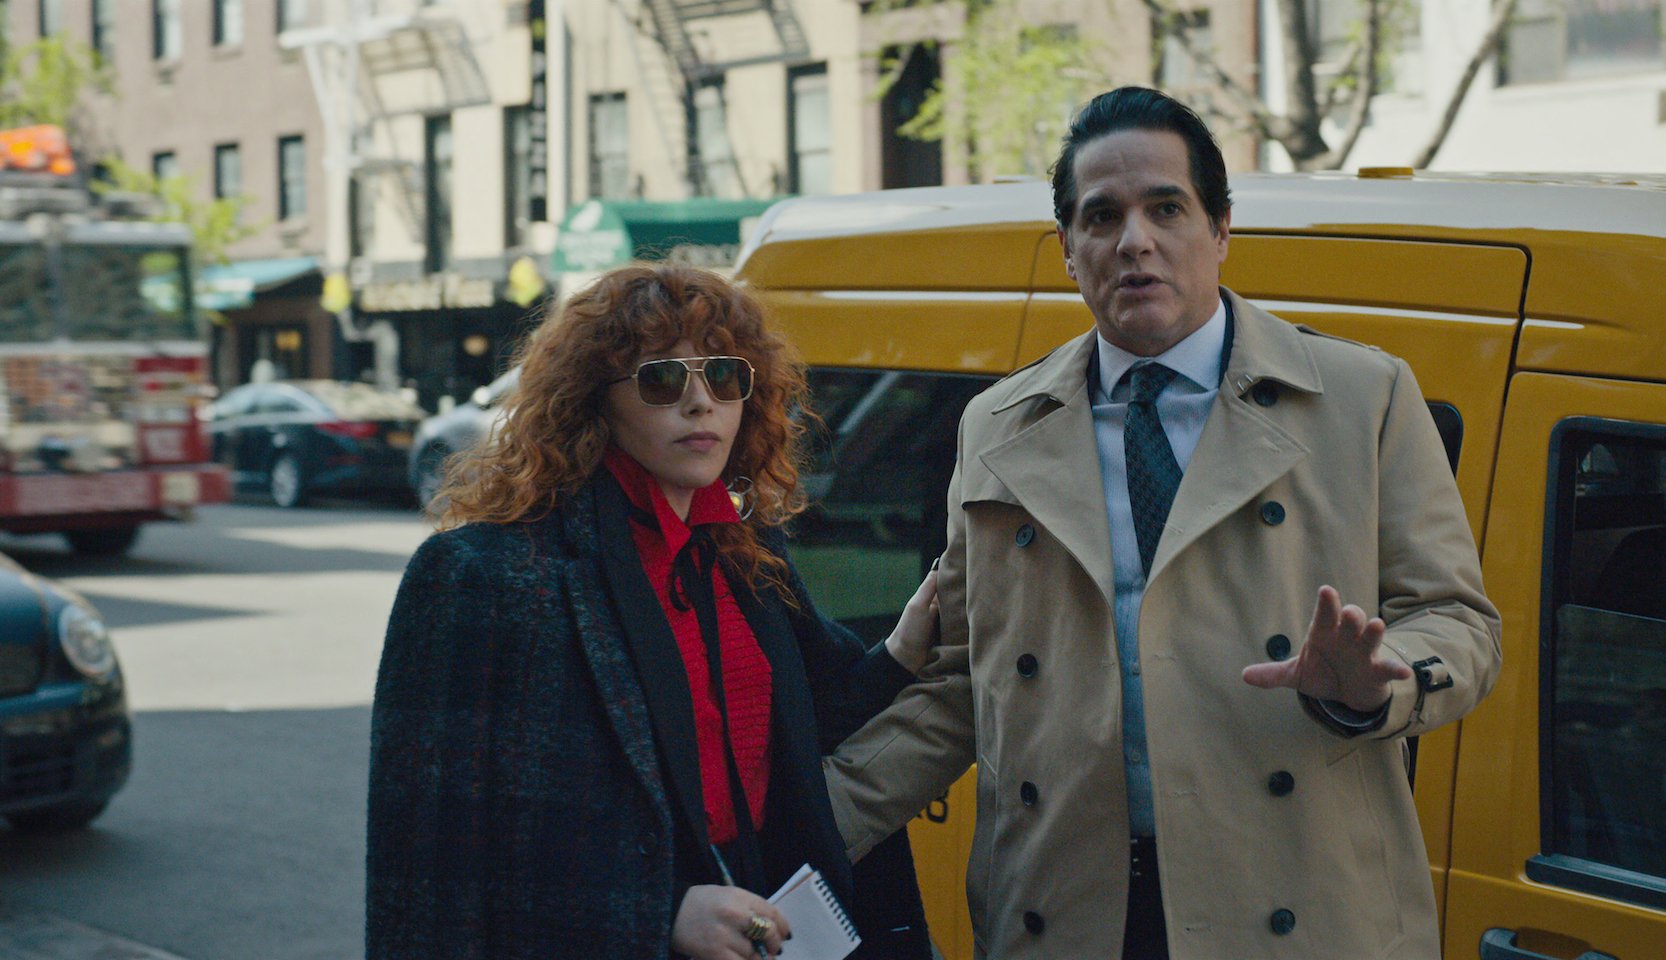 Netflix Russian Doll - a still from Netflix's Russian Doll shows a man and woman standing side-by-side outdoors near a yellow NYC taxi